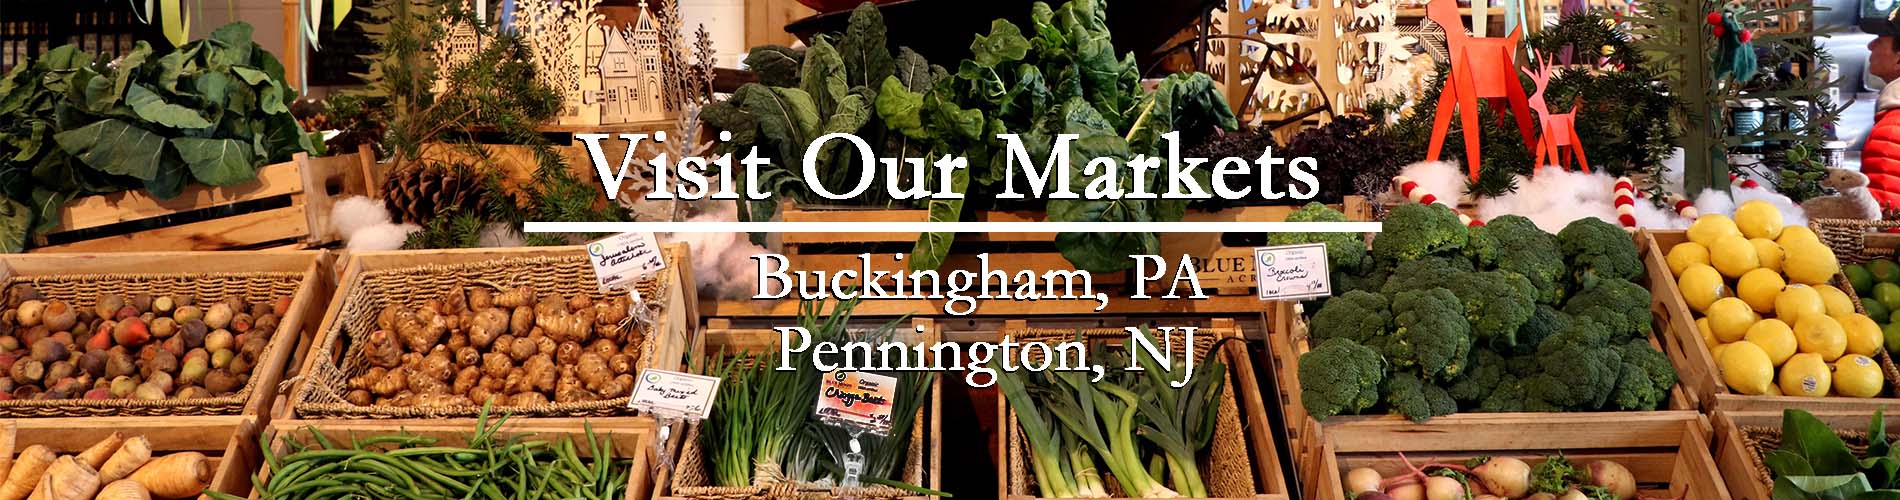 visit our markets in PA and NJ